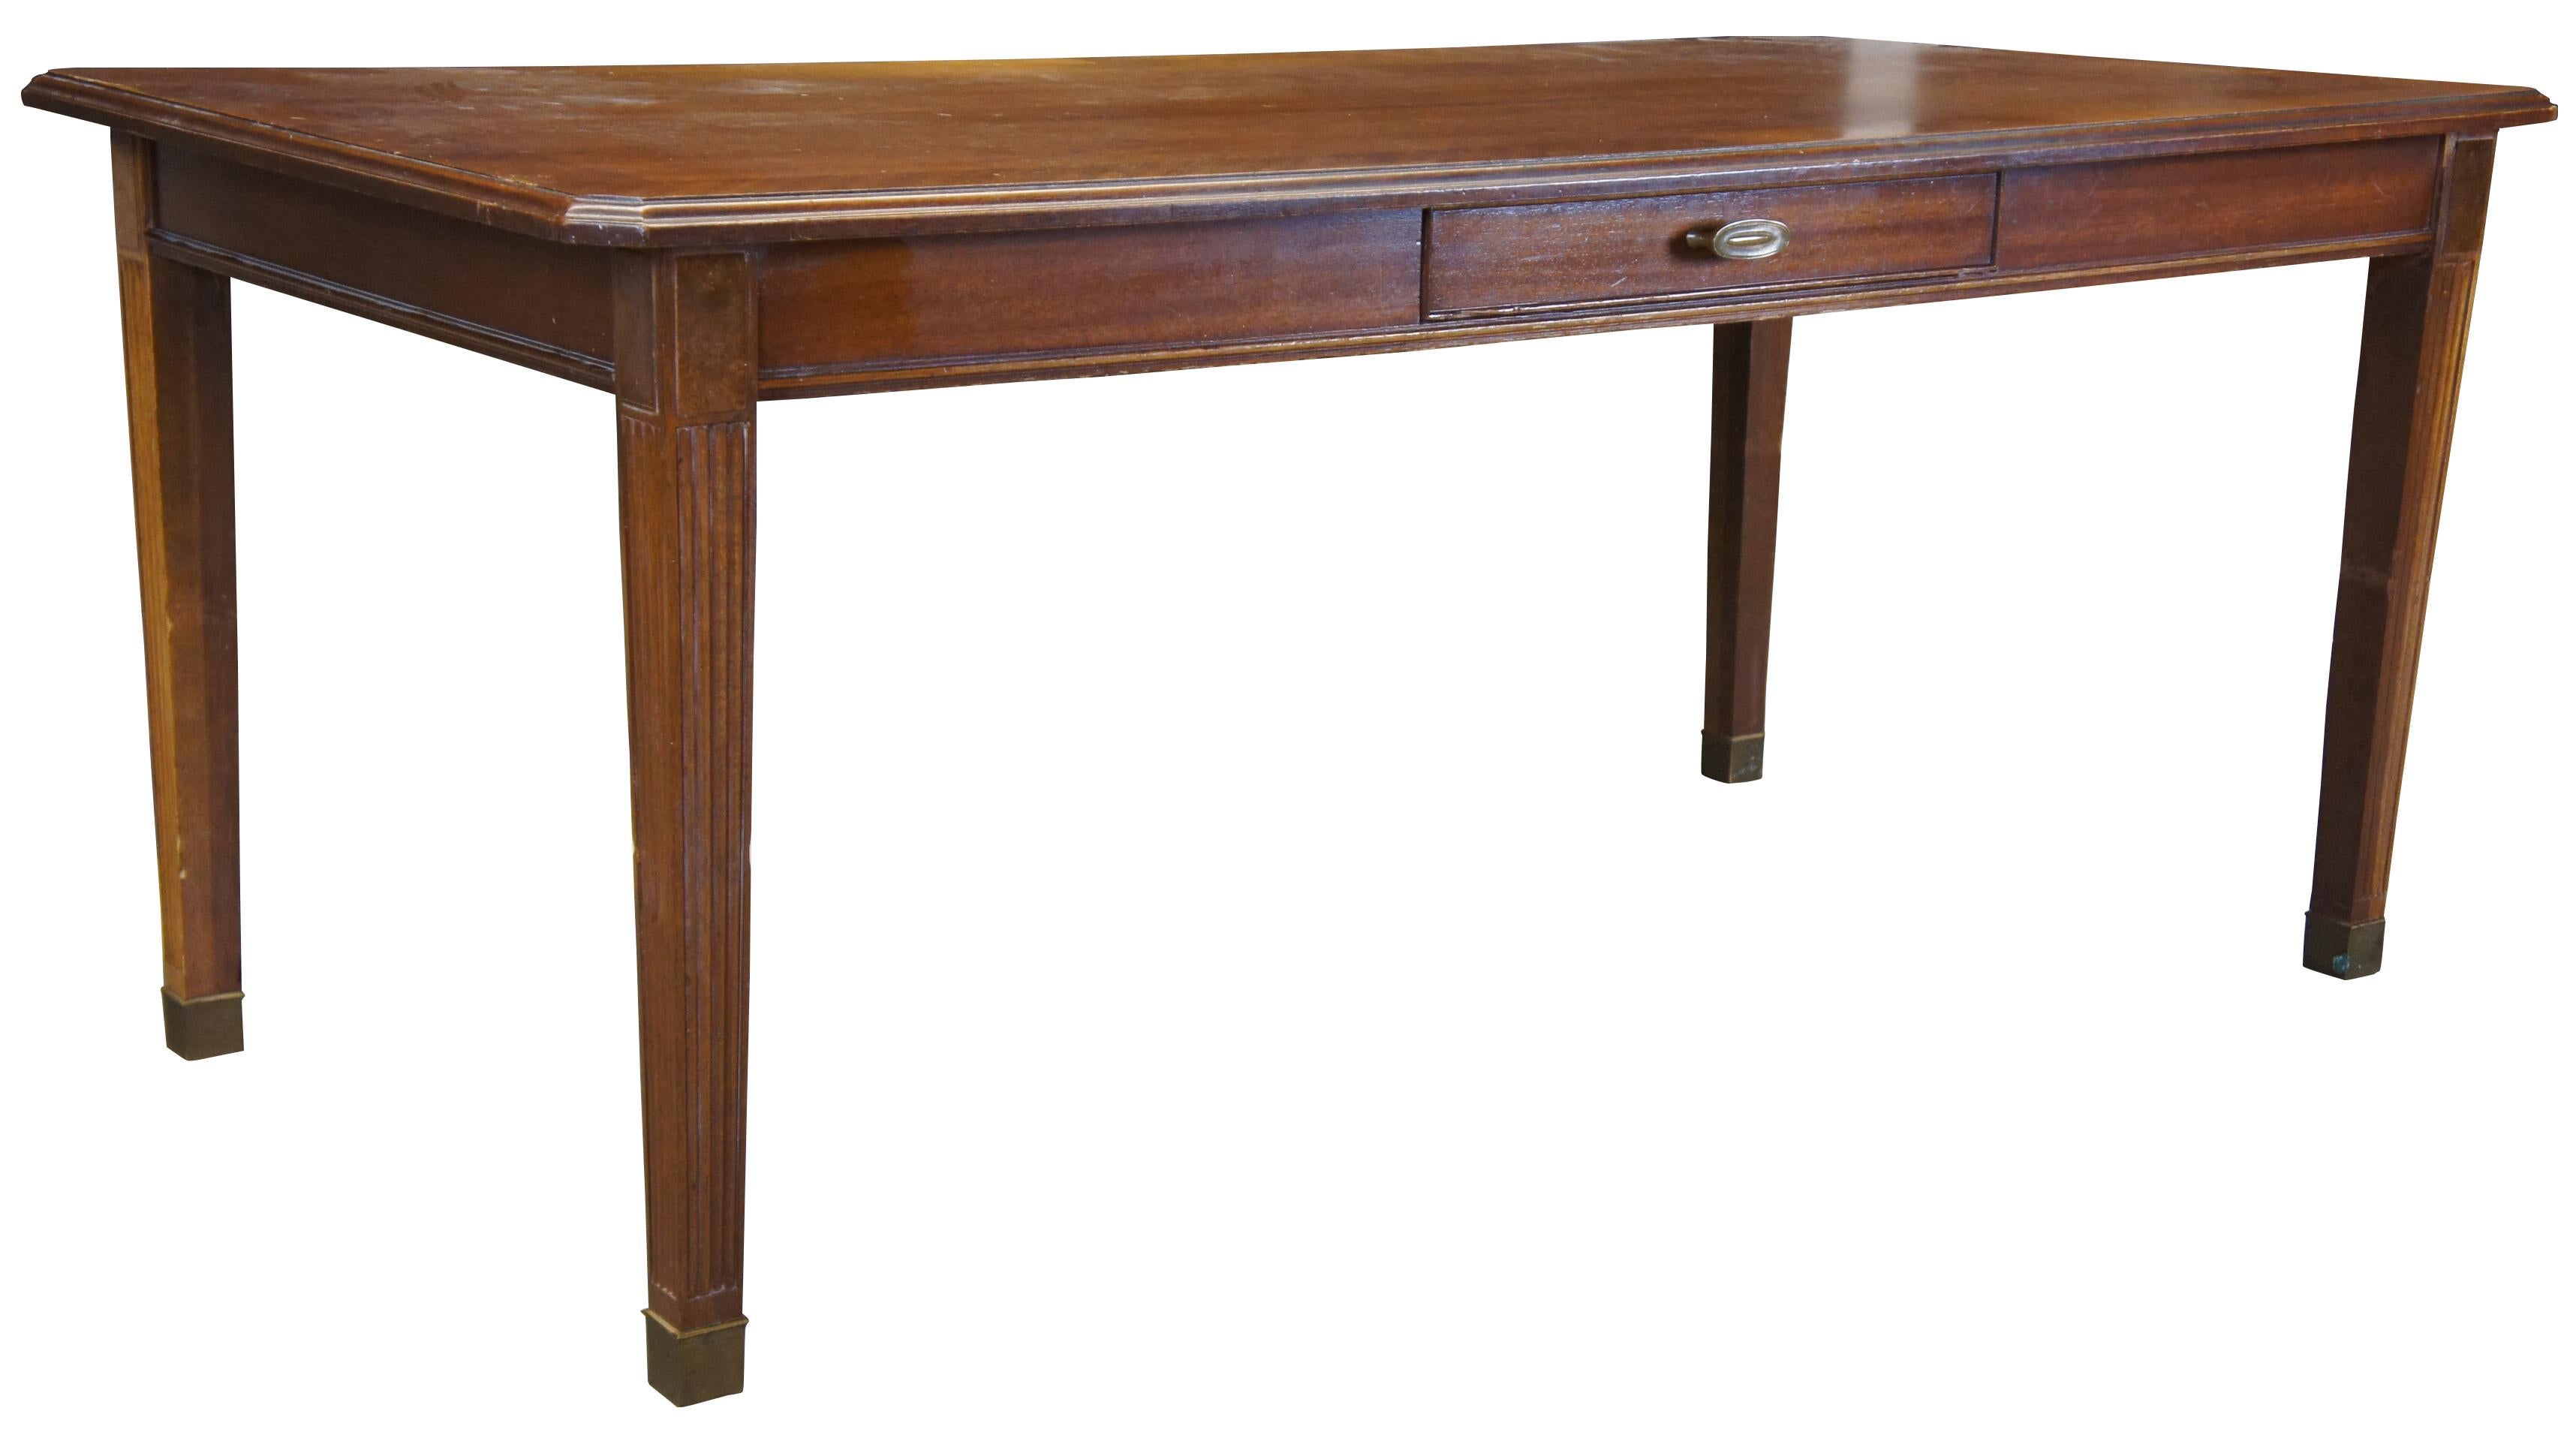 Midcentury library table by Drexel Furniture Company. Made October 1968. Features a traditional design, made from walnut with banded top, a drawer on each side, burl wood accents and square tapered legs with fluting leading to brass caps. Measures: